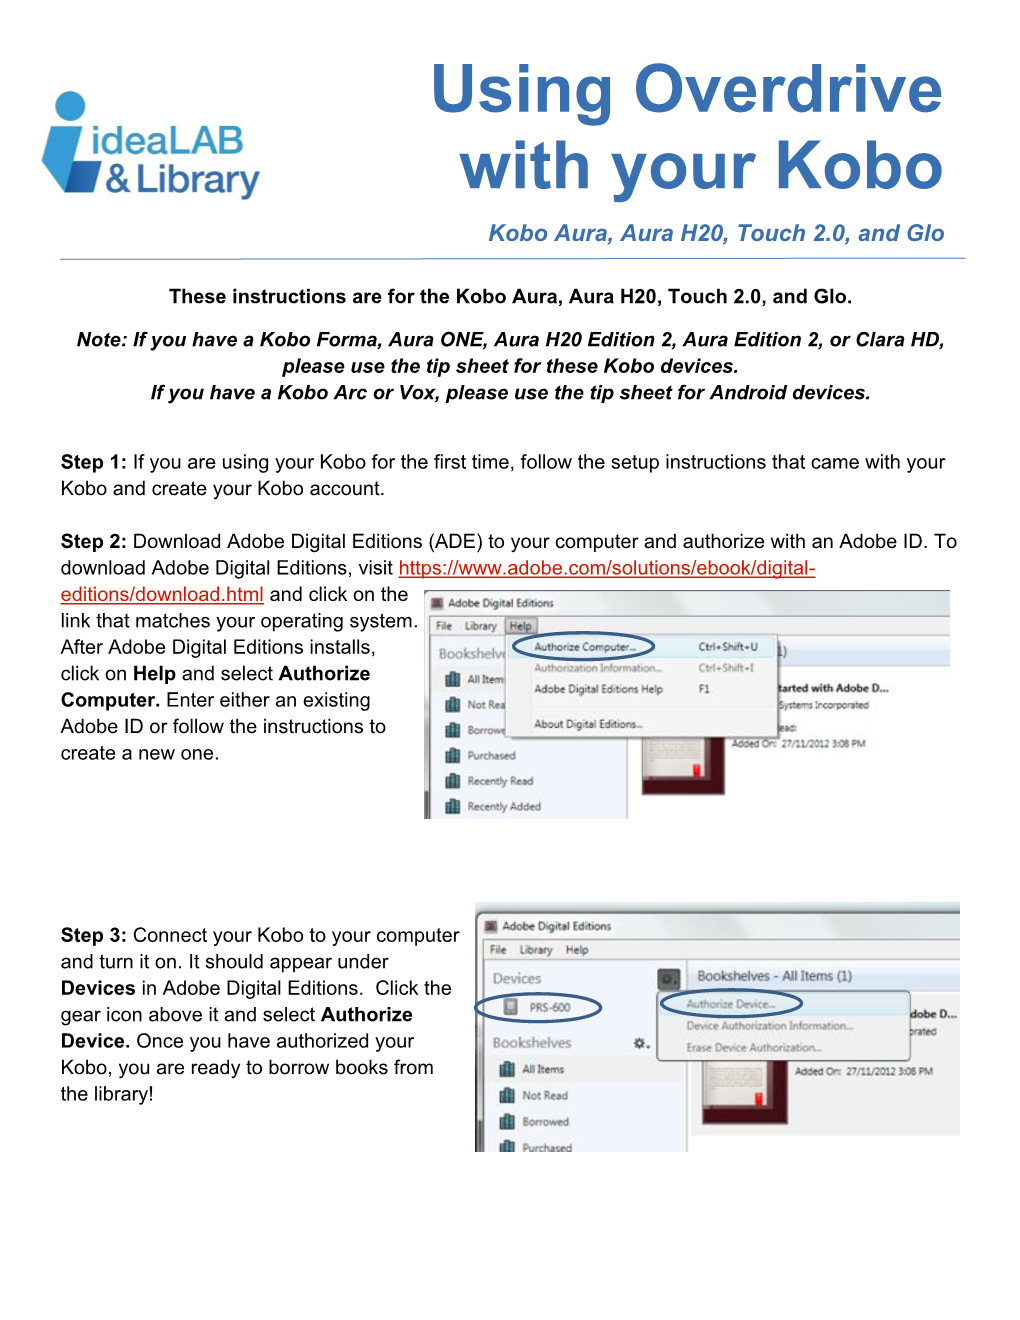 Using Overdrive with Your Kobo